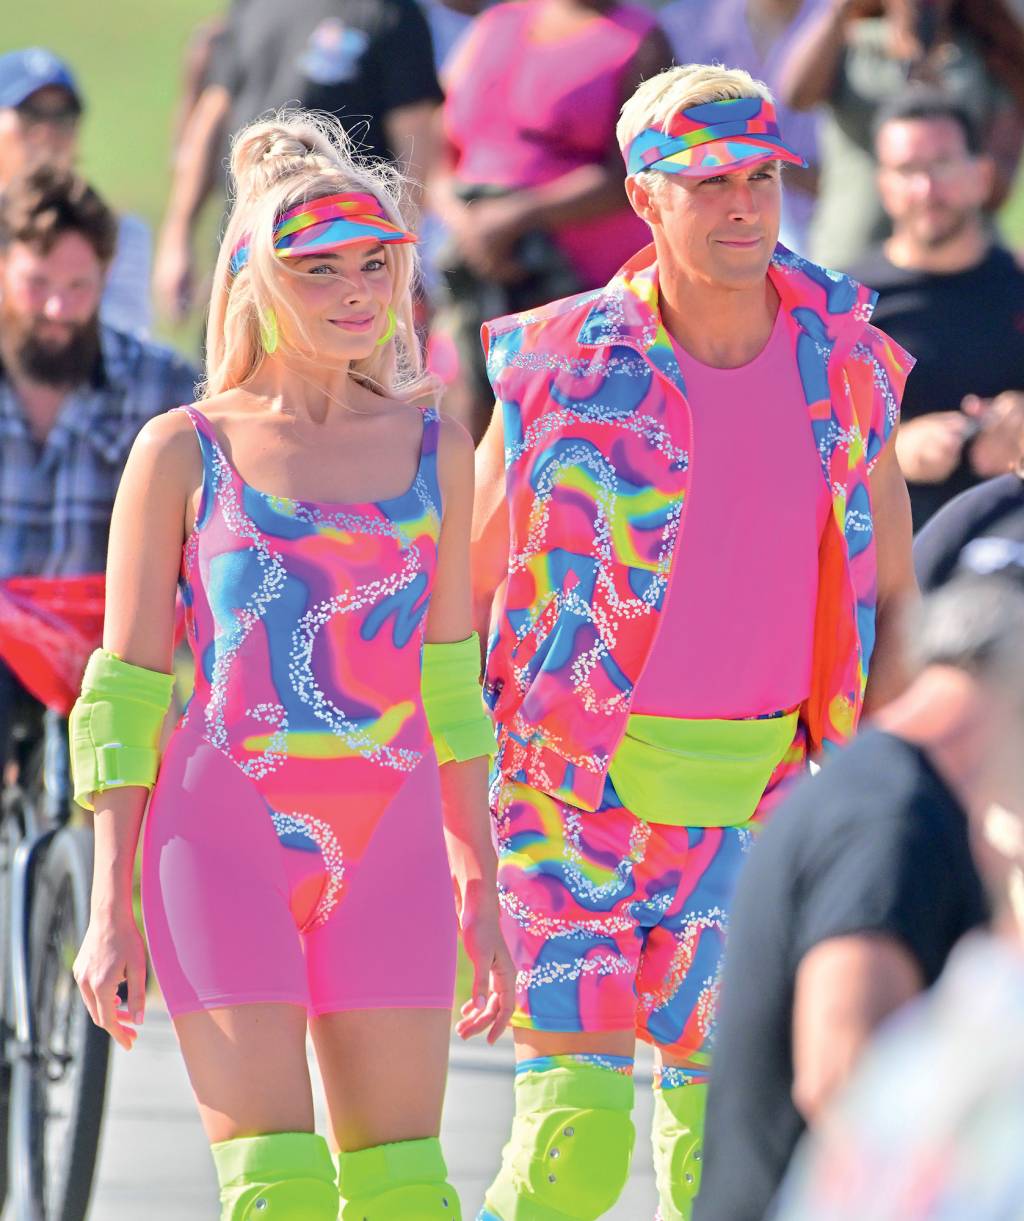 LOS ANGELES CA - JUNE 27: Margot Robbie and Ryan Gosling on rollerblades film new scenes for 'Barbie' in Venice California. 27 Jun 2022. (Photo by MEGA/GC Images)